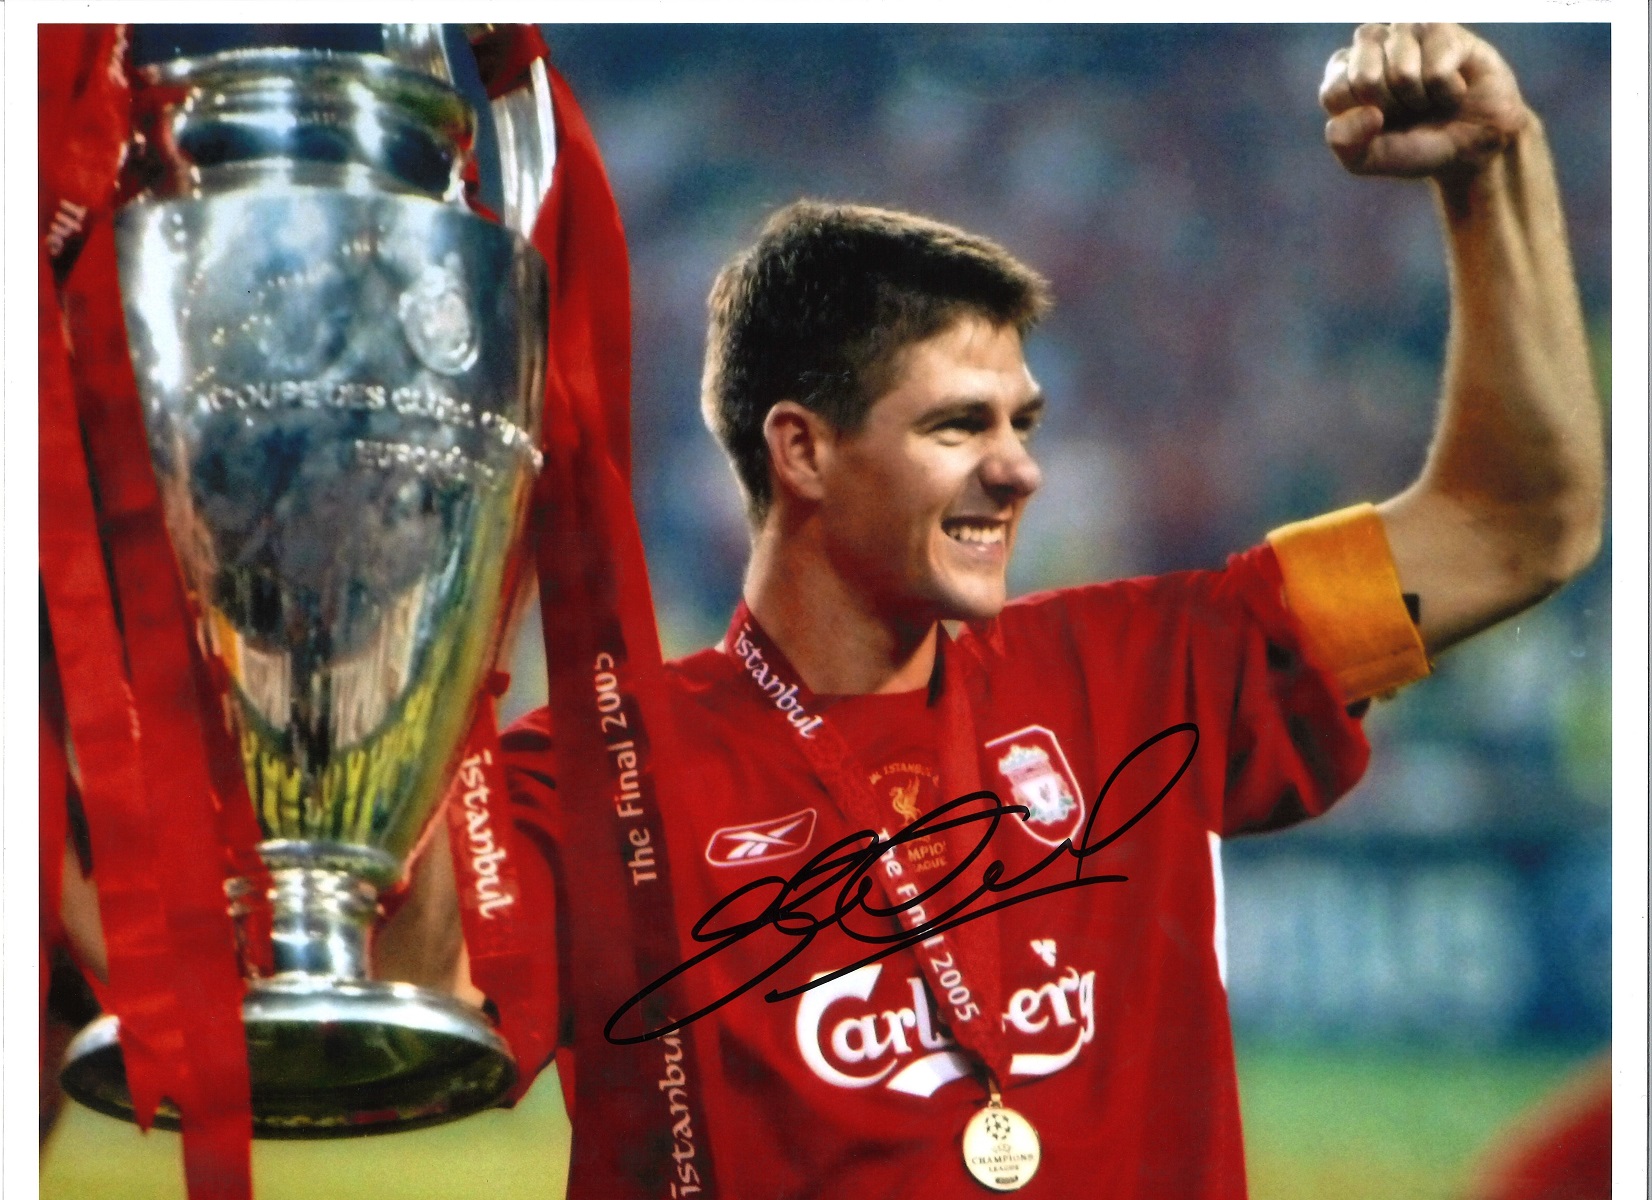 Steven Gerrard Liverpool Signed 16 x 12 inch football photo. Good Condition. All autographs are